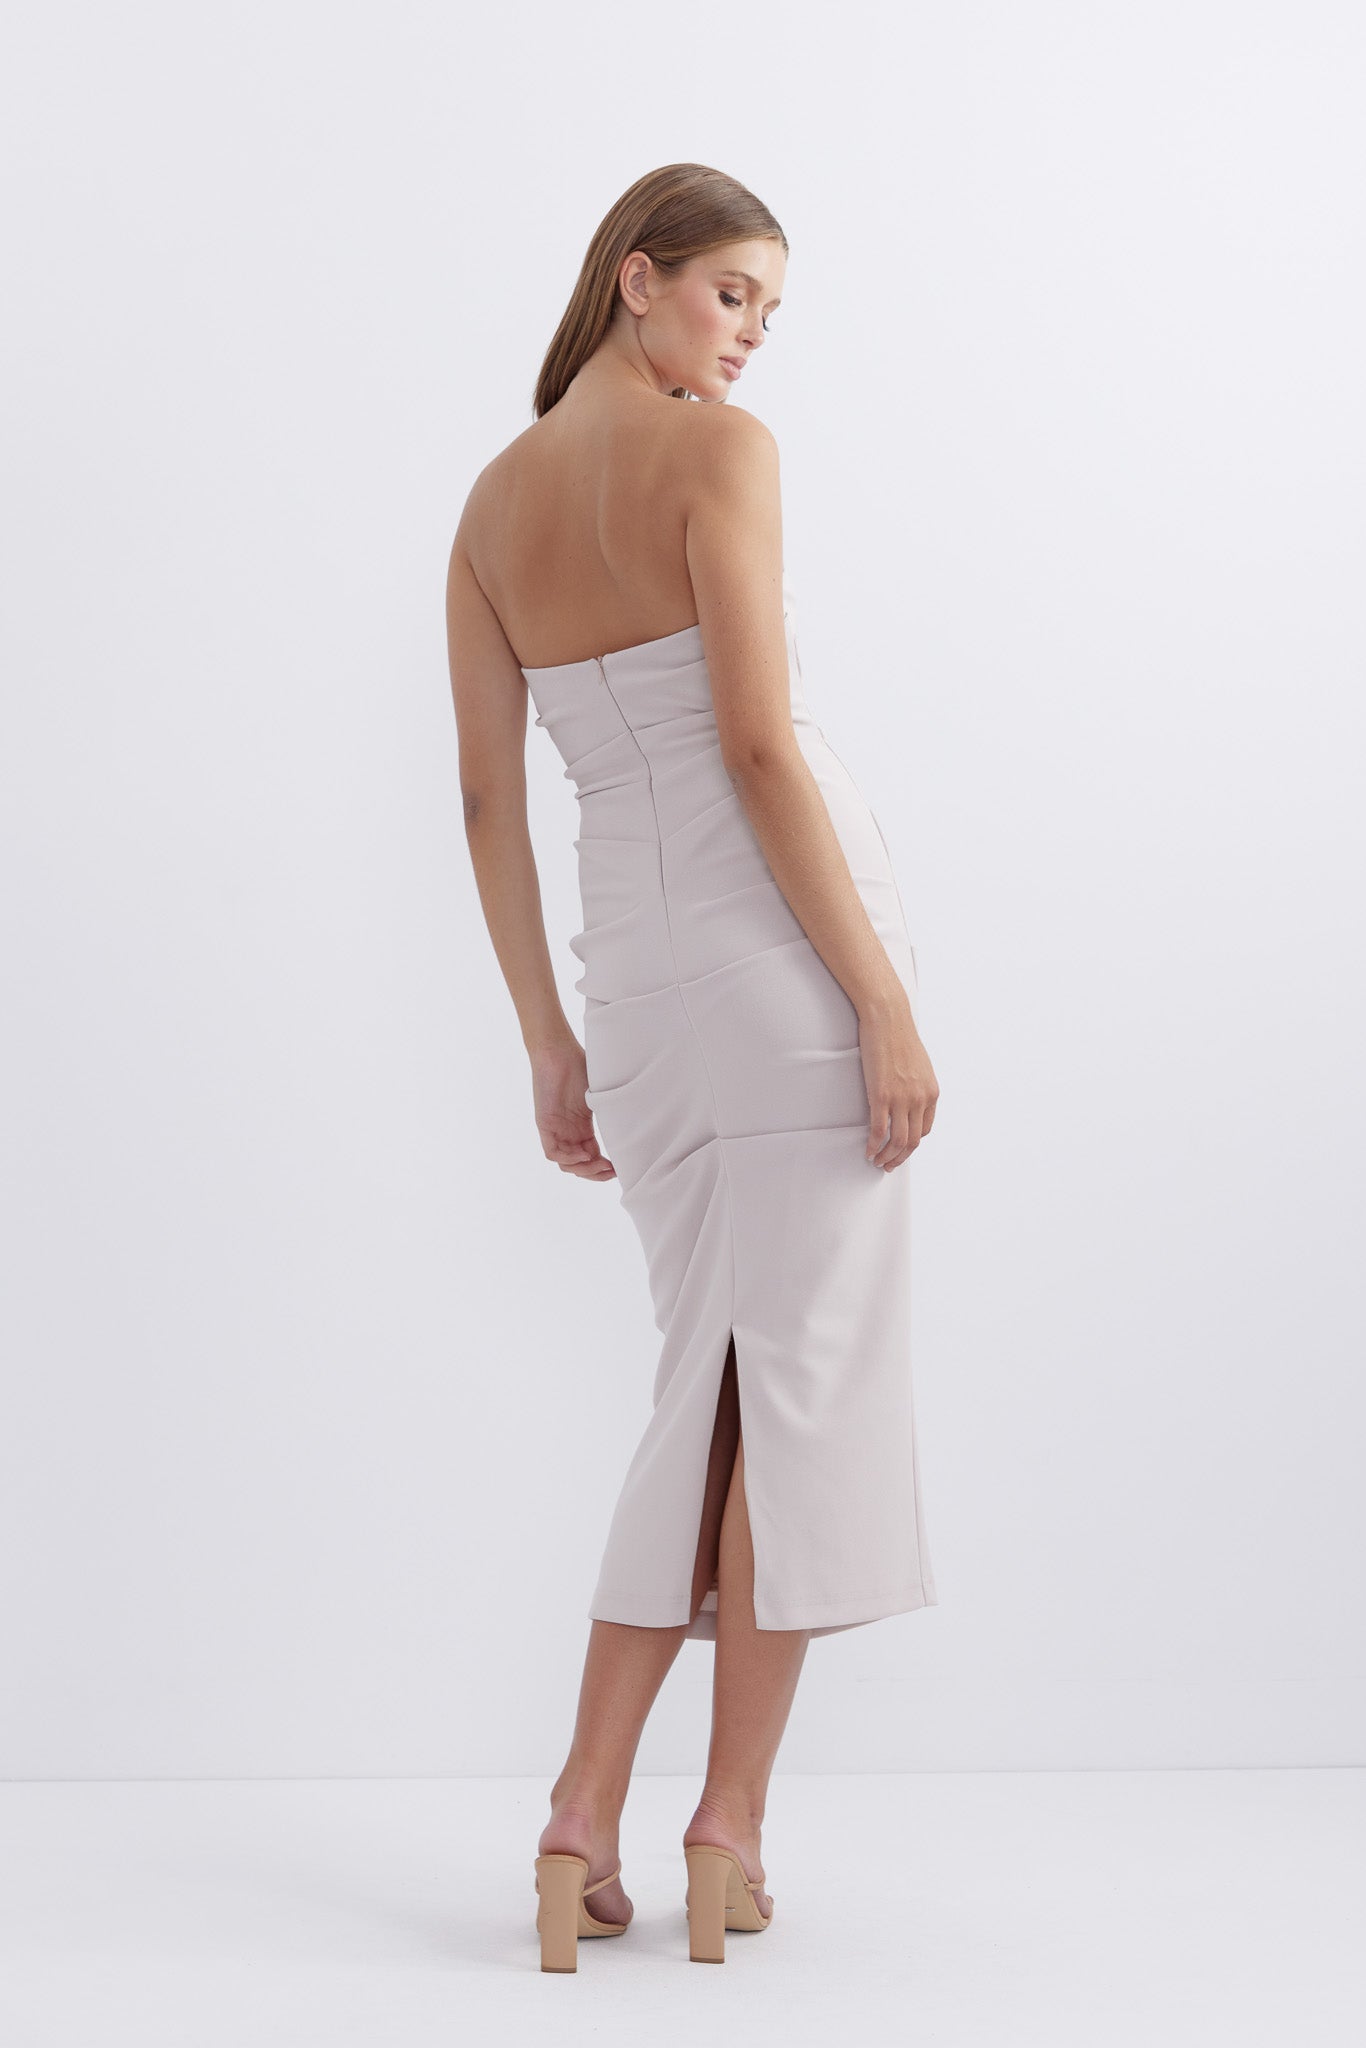 Evie Fitted Midi - TAKE 40% OFF DISCOUNT APPLIED AT CHECKOUT